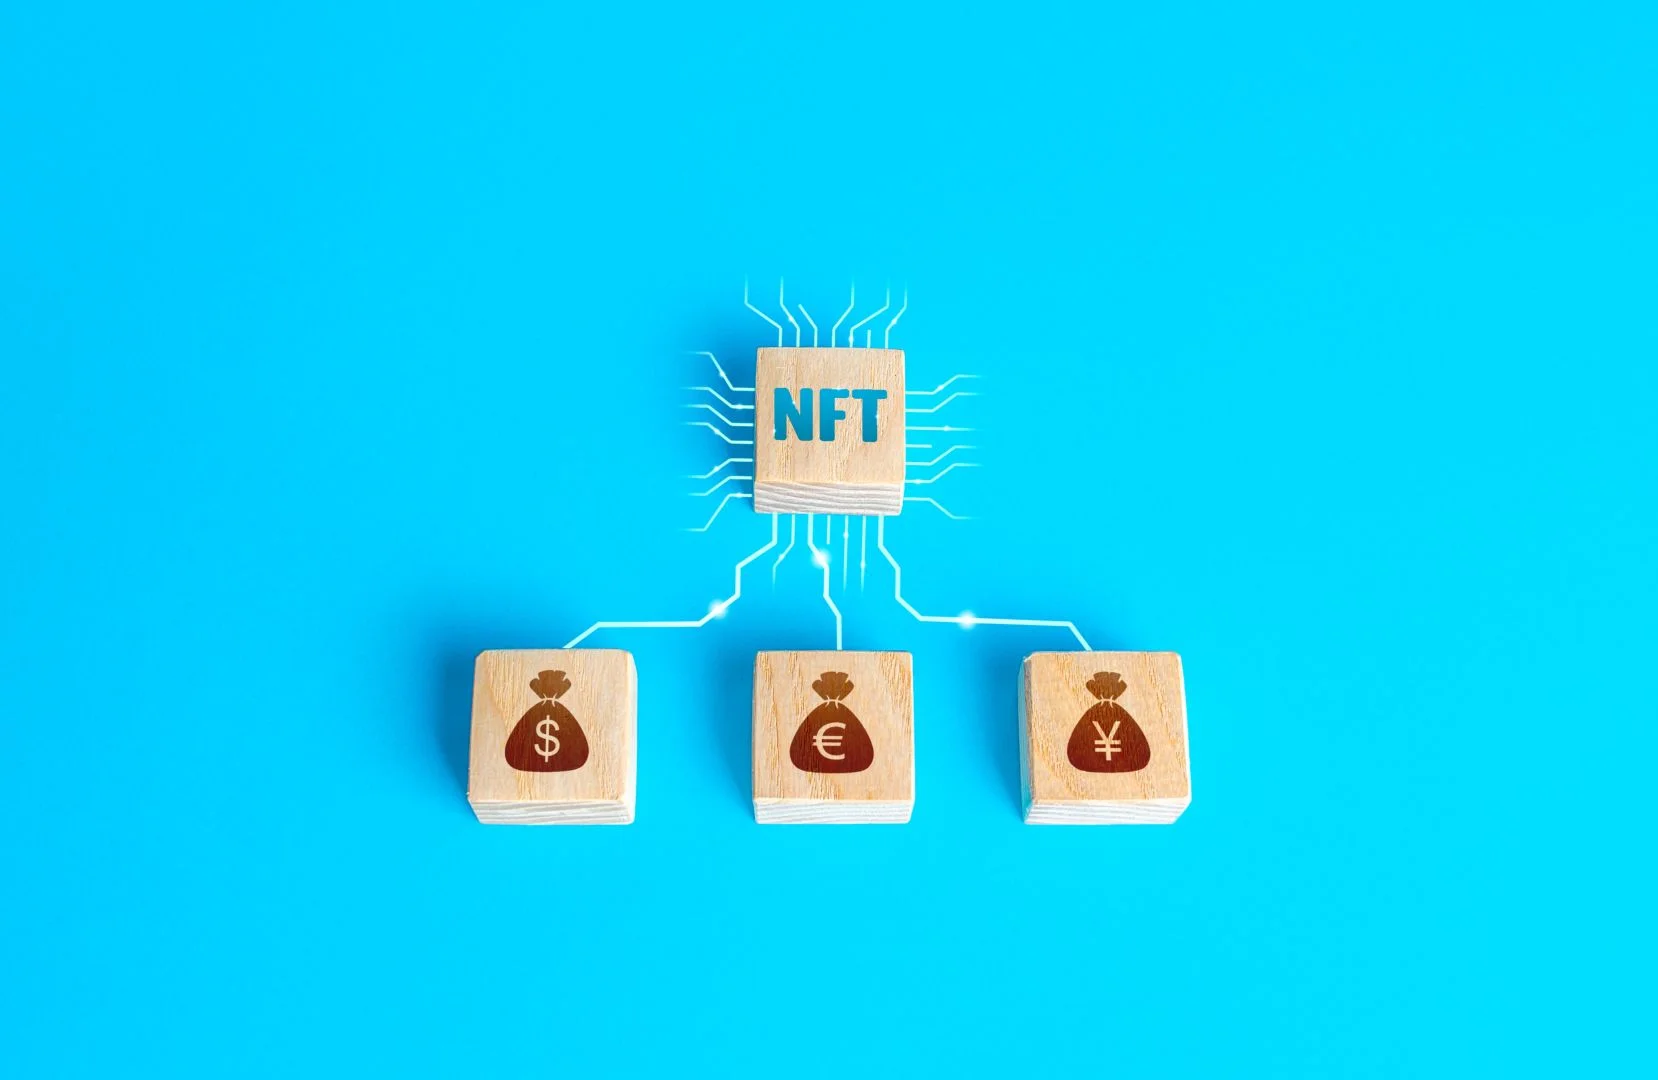  Blocks NFT non-fungible token and money connected by lines. Selling digital assets and art 